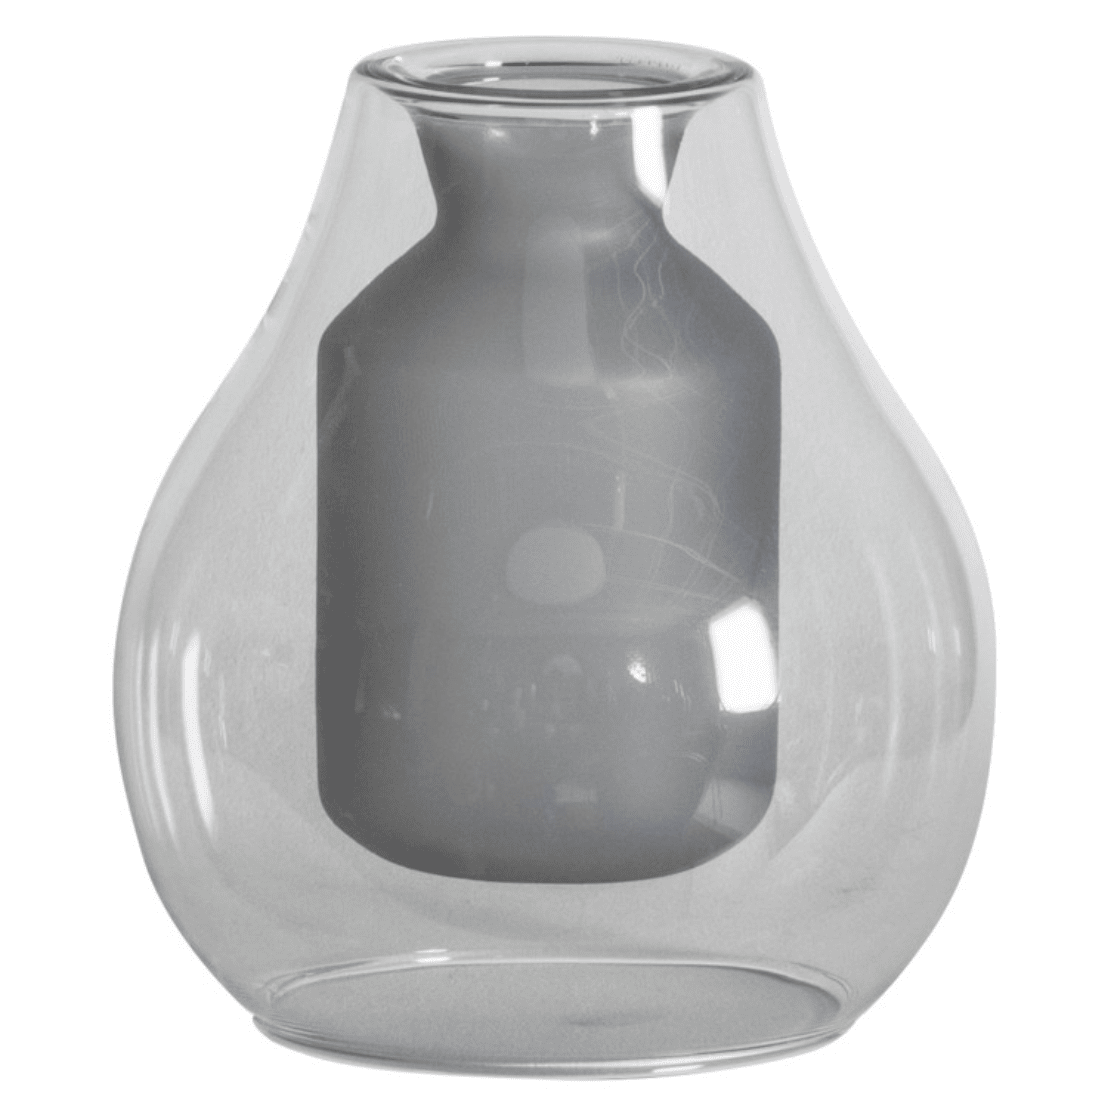 Suspended Round Grey Vase - Outlet - Save 20%